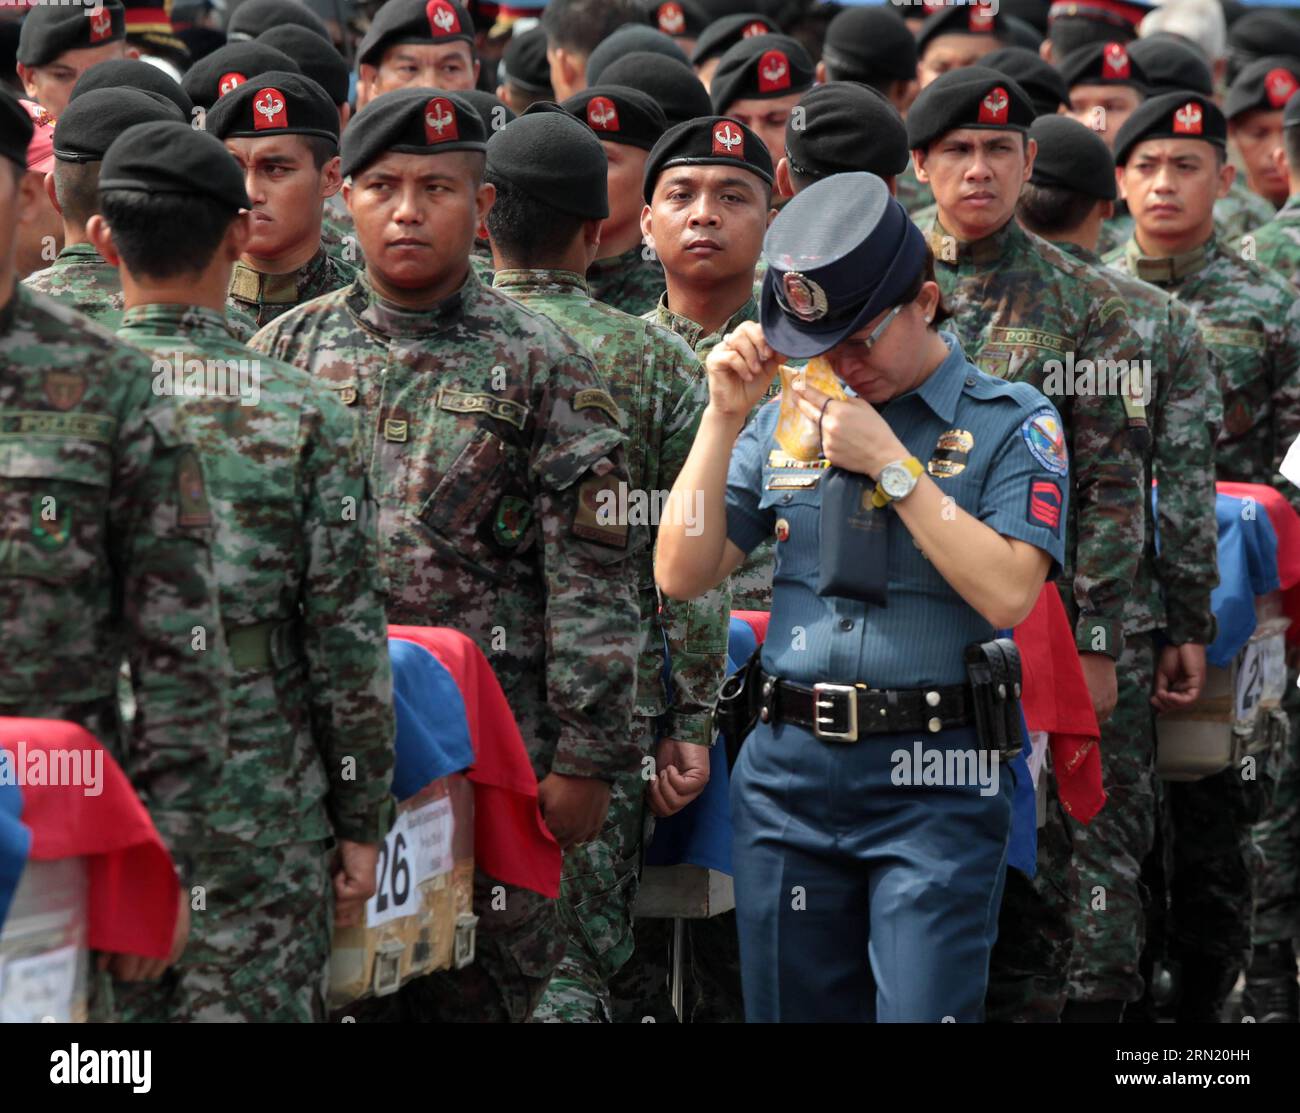 (150129) -- PASAY CITY, Jan. 29, 2015 -- A policewoman weeps as she walks past the caskets carrying the fallen members of the Philippine National Police Special Action Force (PNP-SAF) at the Villamor Air Base in Pasay City, the Philippines, Jan. 29, 2015. Forty-four members of the PNP-SAF were killed allegedly by Moro Islamic Liberation Front and Bangsamoro Islamic Freedom Fighters members on Jan. 25 in Mamasapano, Maguindanao. ) PHILIPPINES-PASAY CITY-POLICE RouellexUmali PUBLICATIONxNOTxINxCHN   Pasay City Jan 29 2015 a police woman  As She Walks Past The casket carrying The Fall Members of Stock Photo